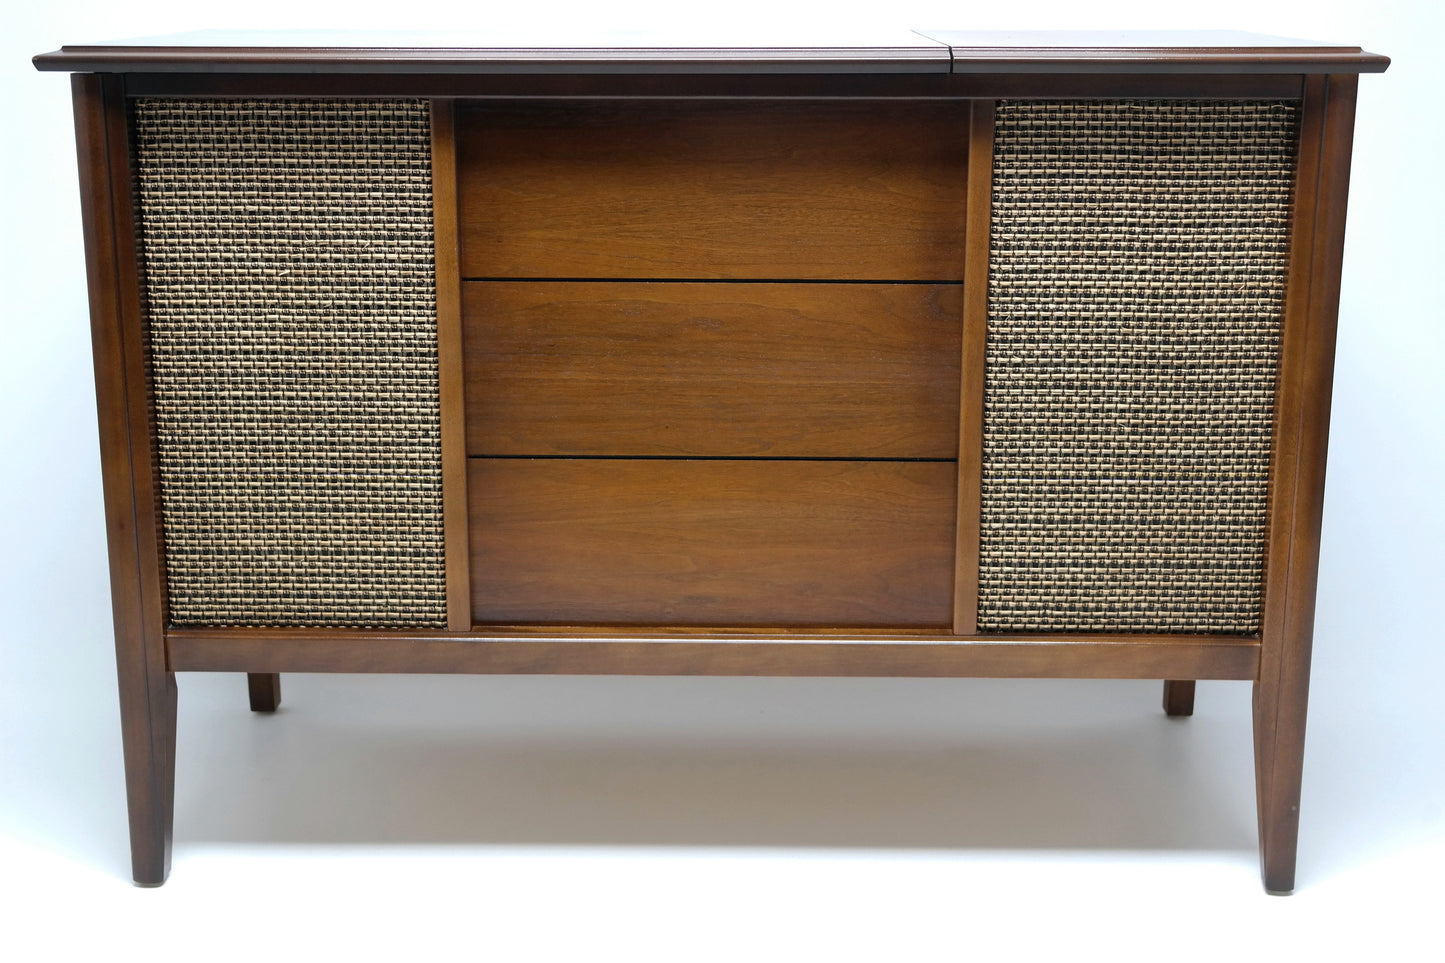 VINTAGE Mid Century Zenith Mini Stereo Console Bluetooth iPod iPhone Android Input MINI Record Player The Vintedge Co.